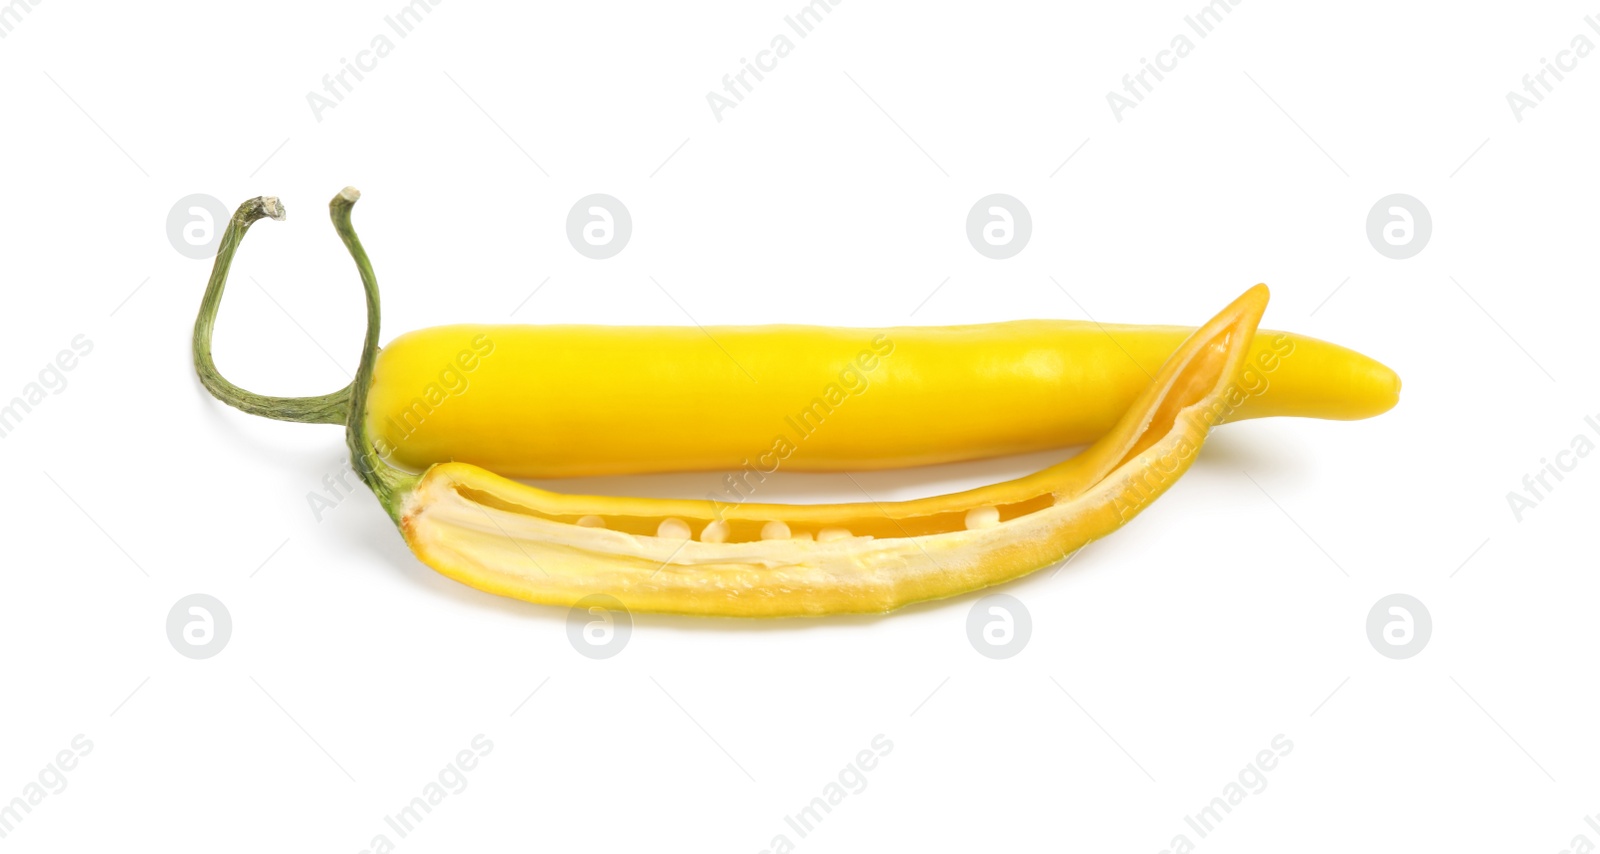 Photo of Cut and whole ripe yellow chili peppers isolated on white